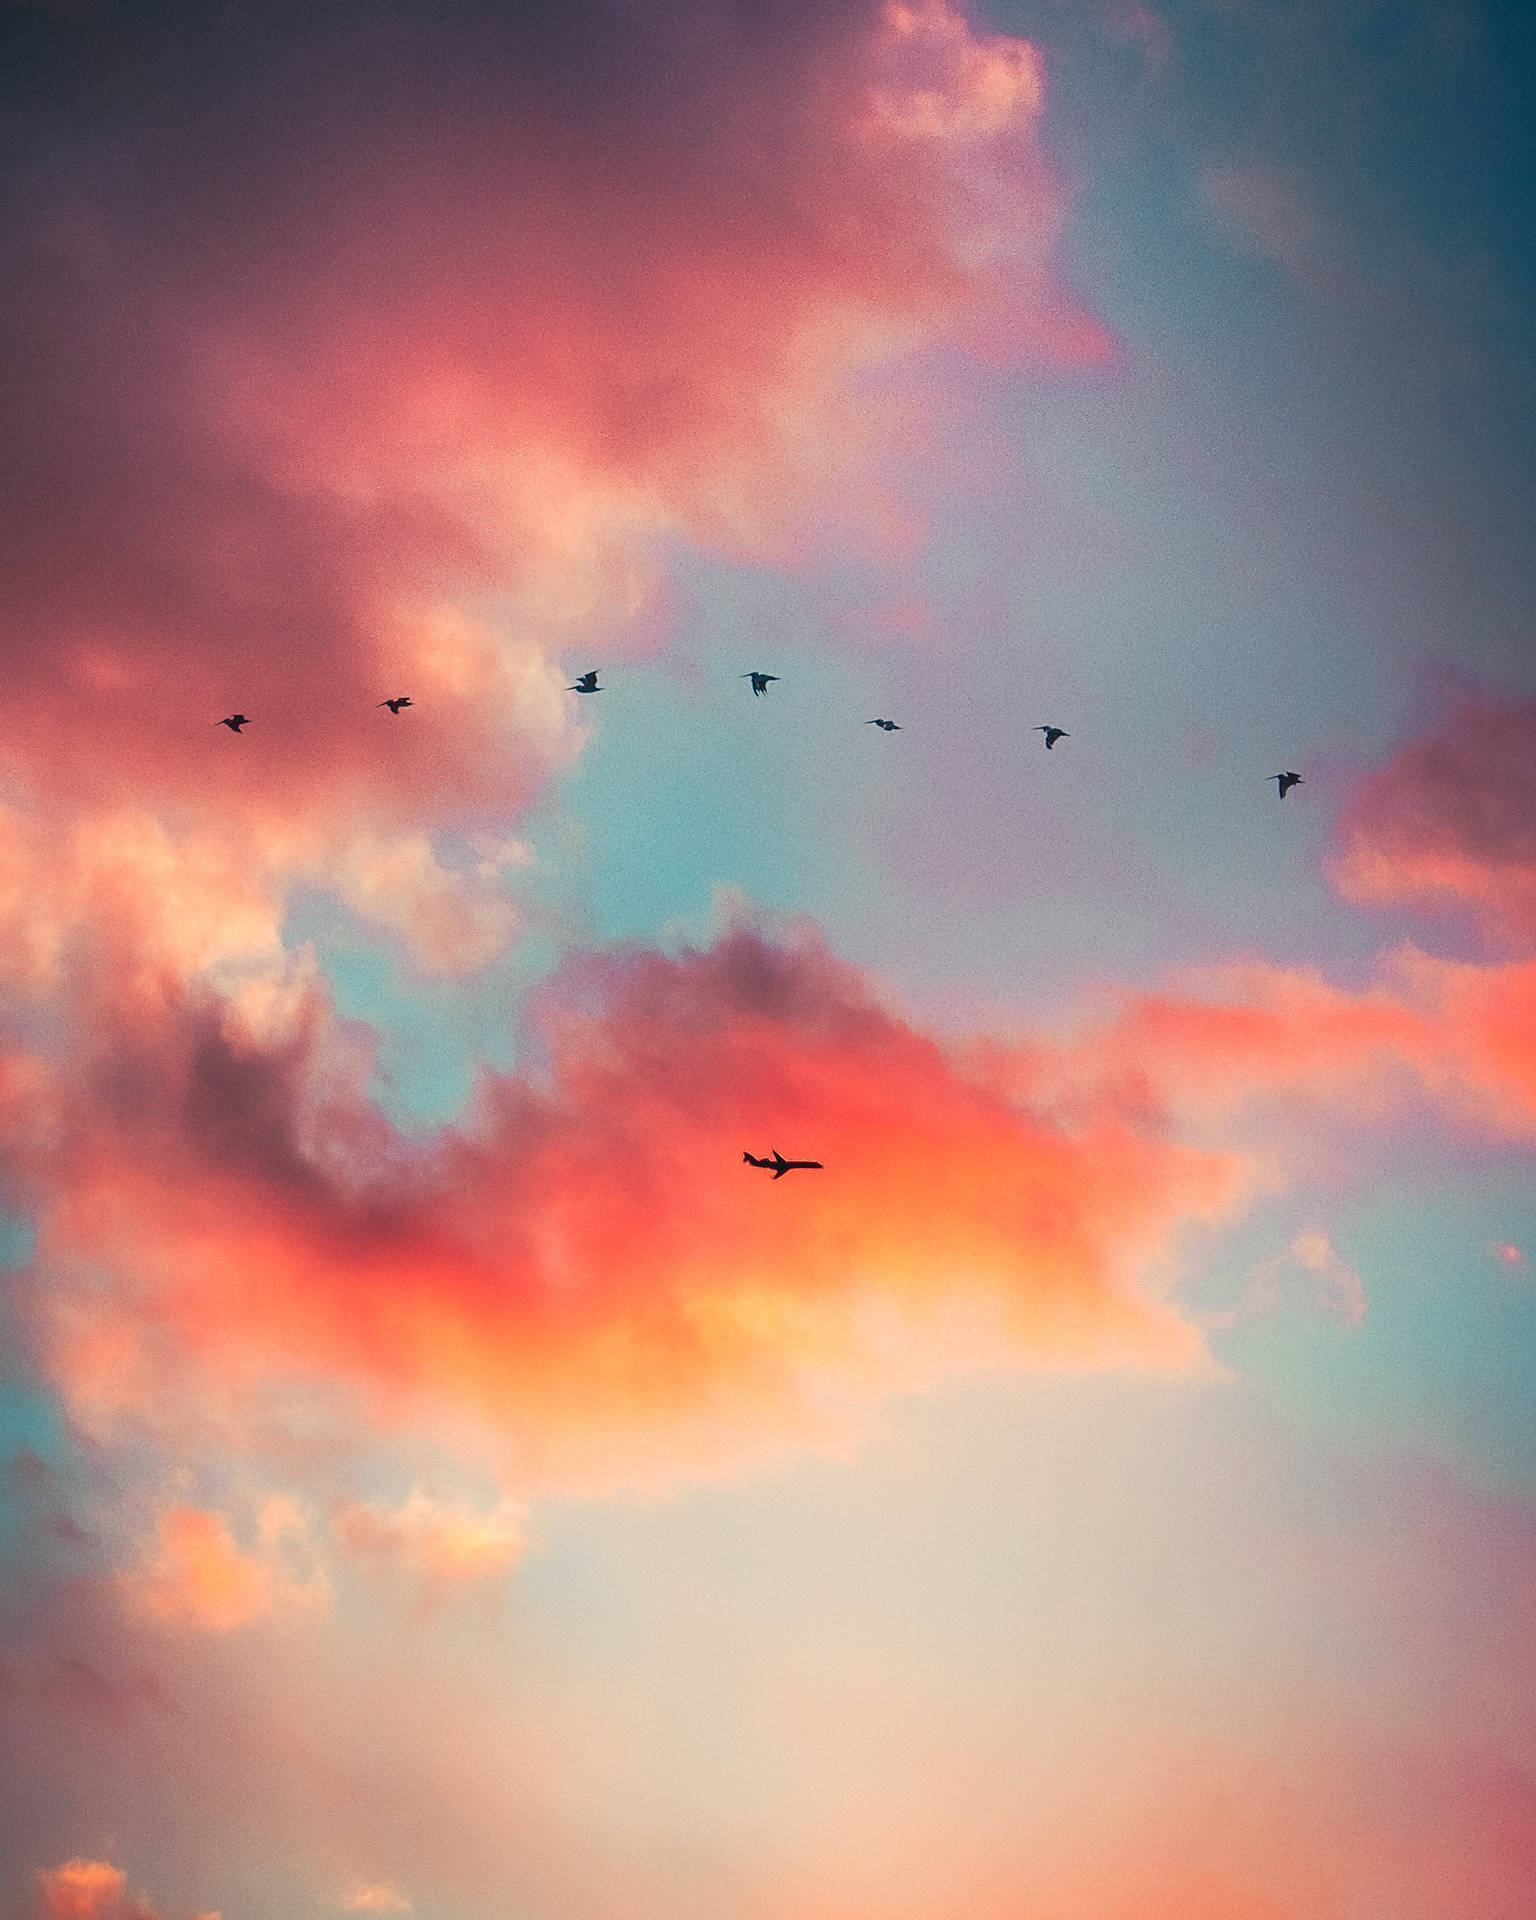 A flock of birds flying over the sky - Vintage clouds, cloud